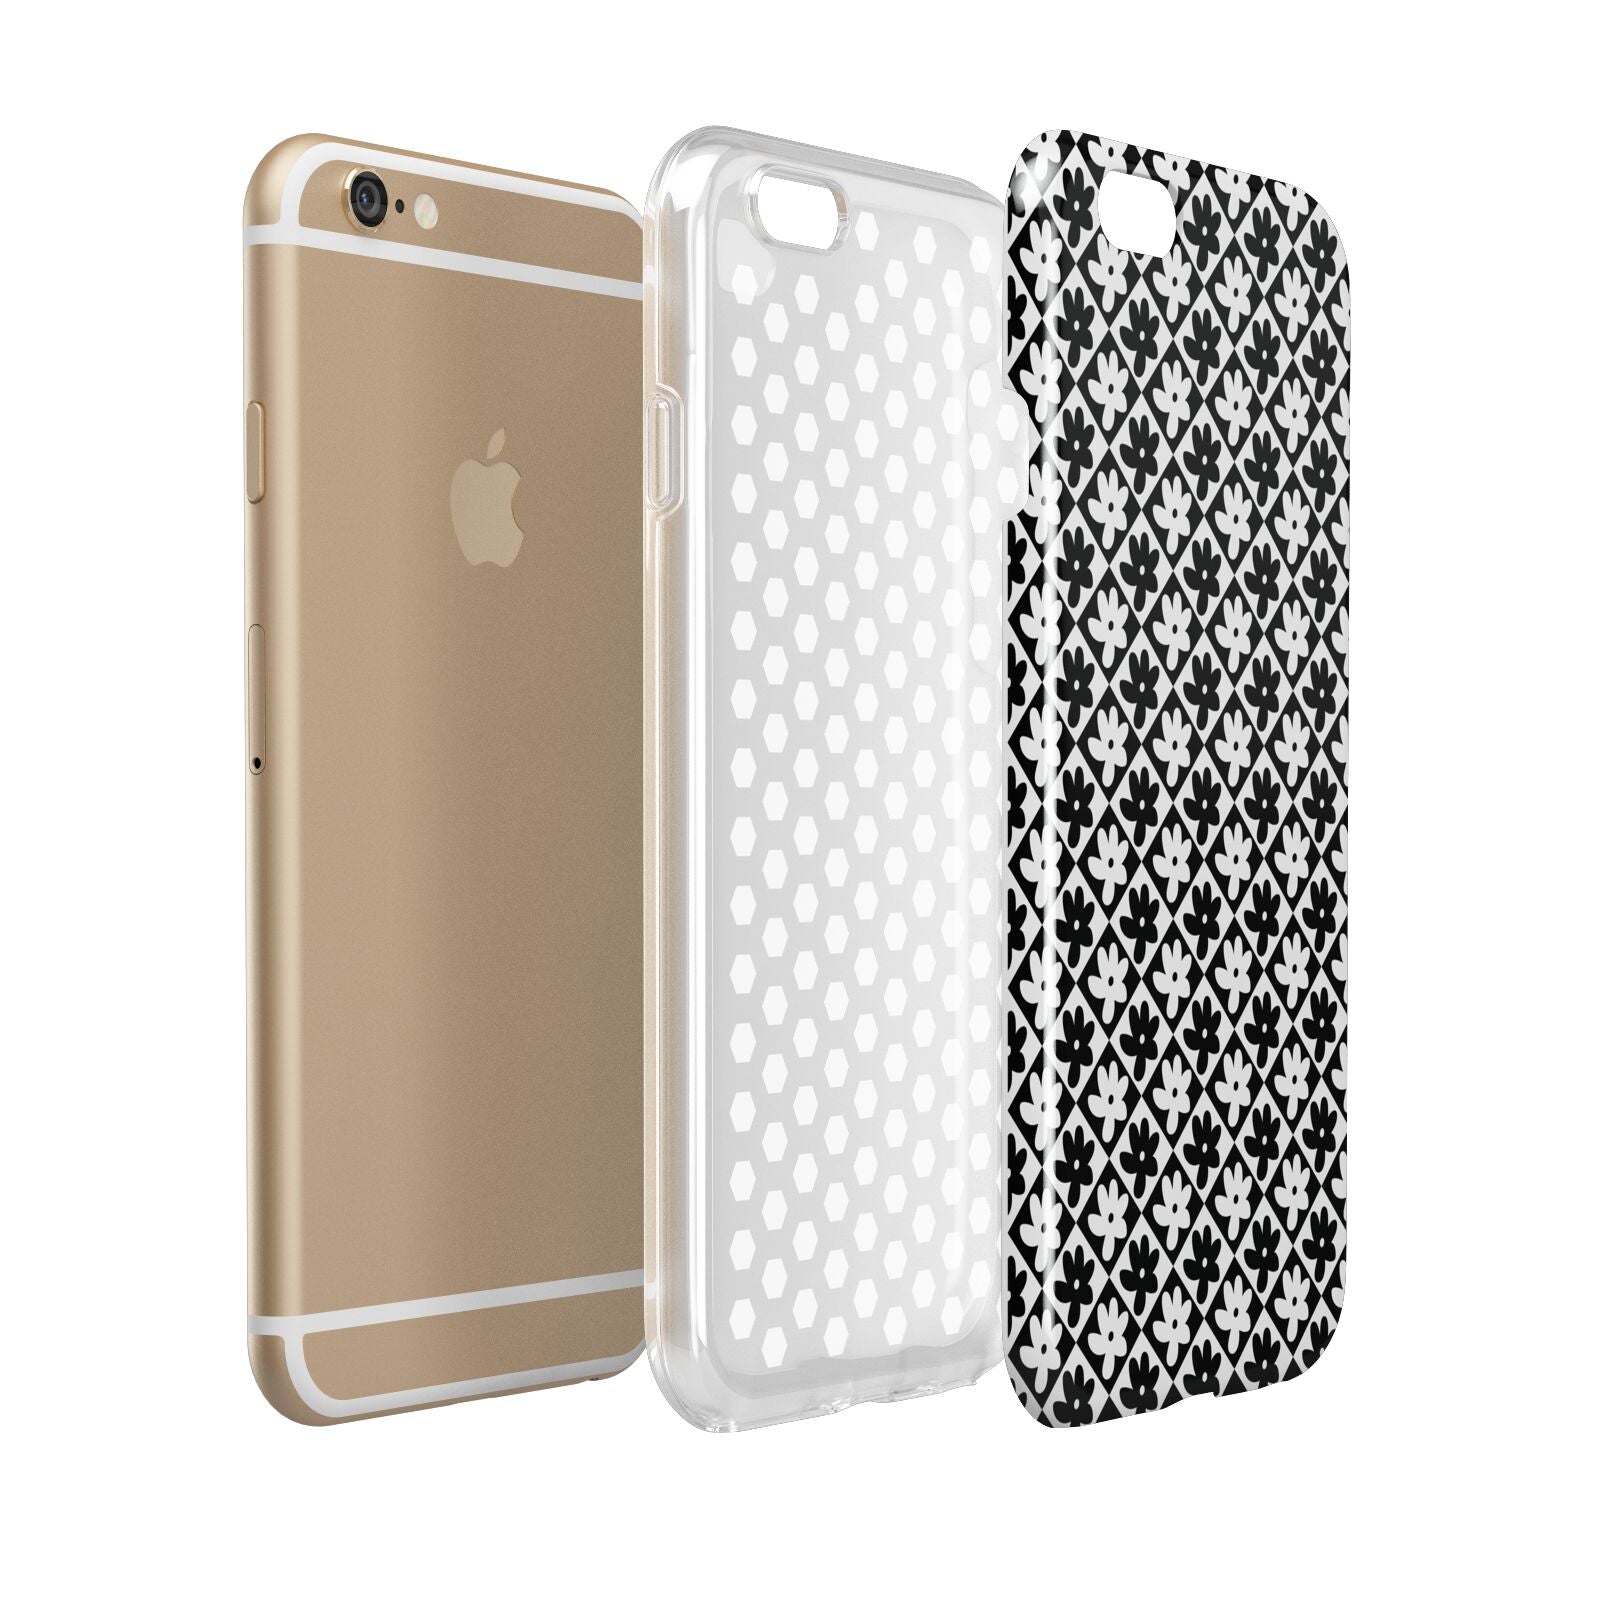 Check Flower Apple iPhone 6 3D Tough Case Expanded view